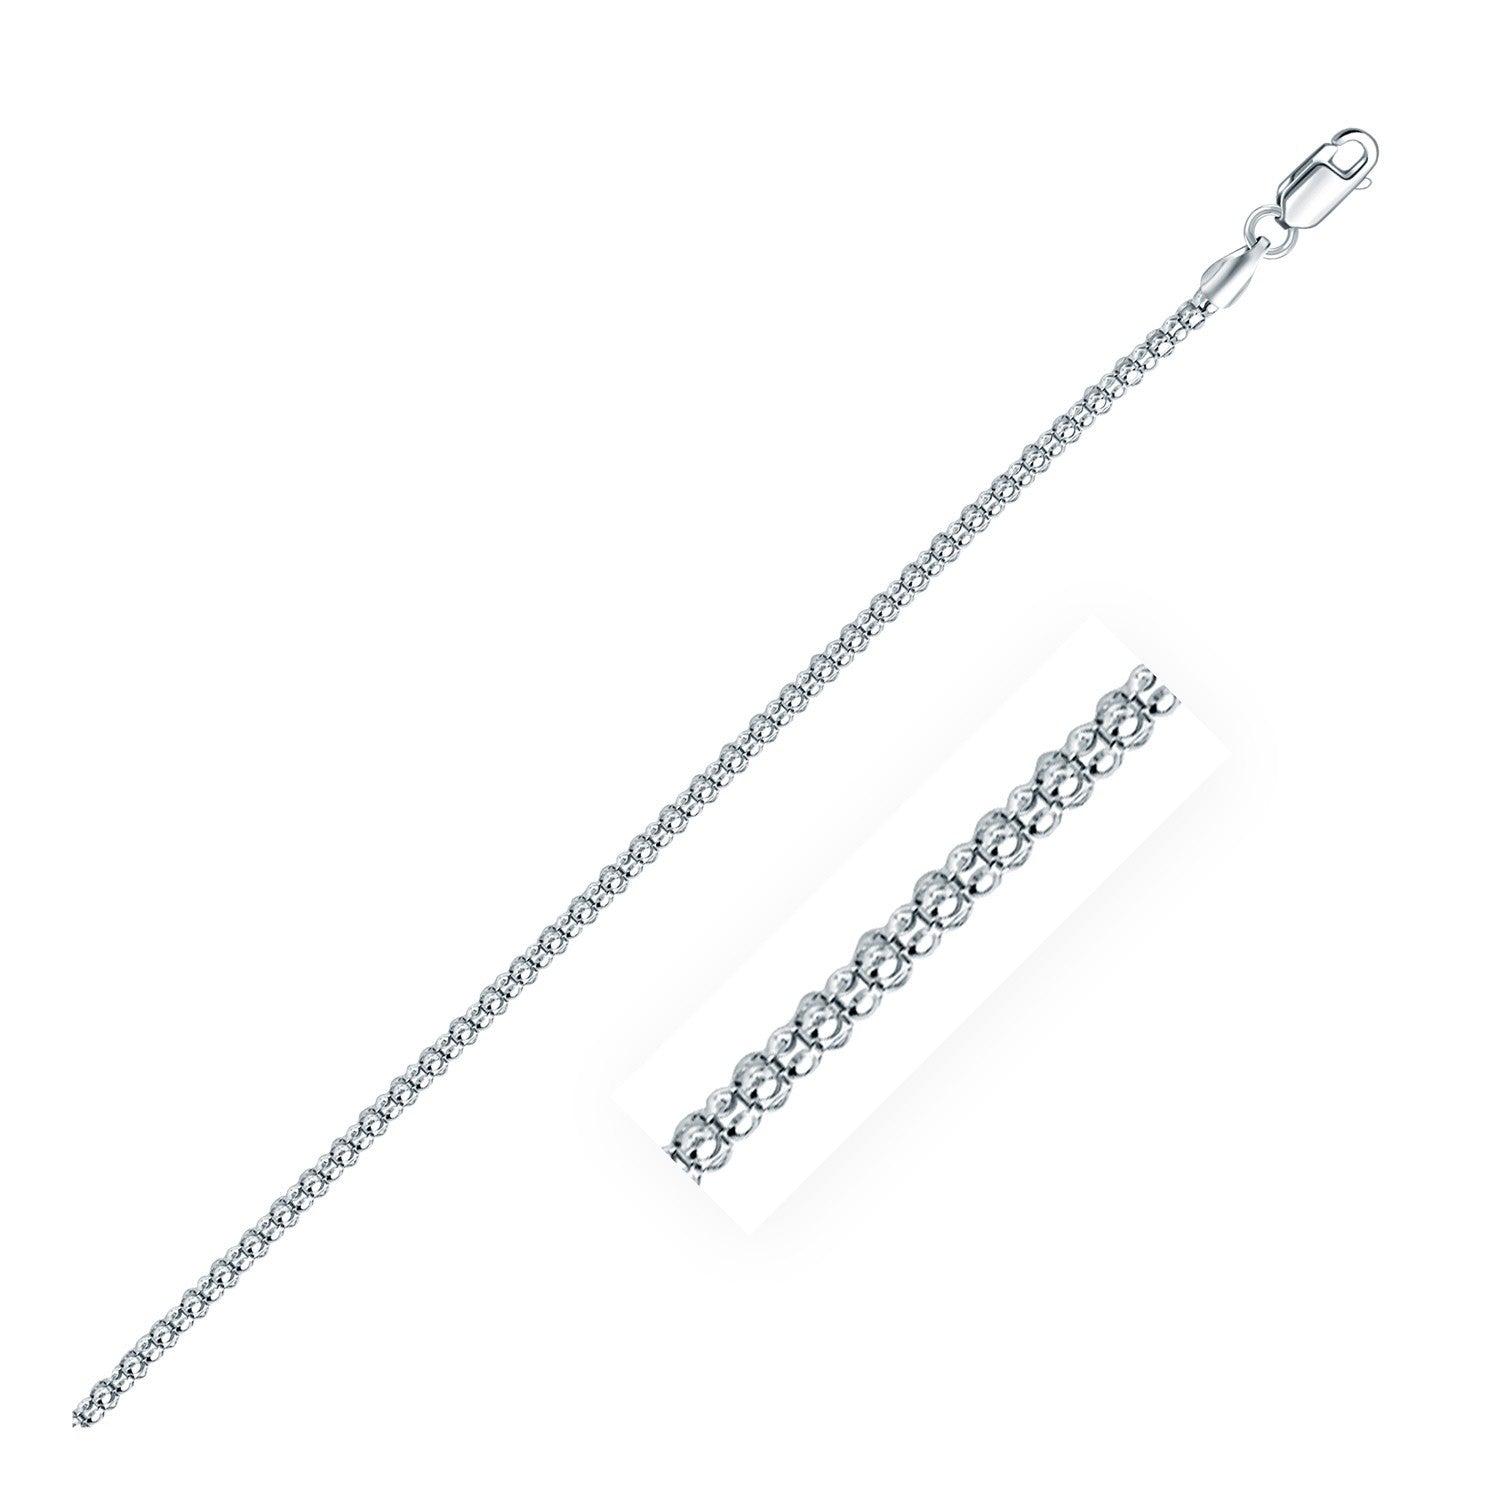 Rhodium Plated 2.5mm Sterling Silver Popcorn Style Chain, size 18''